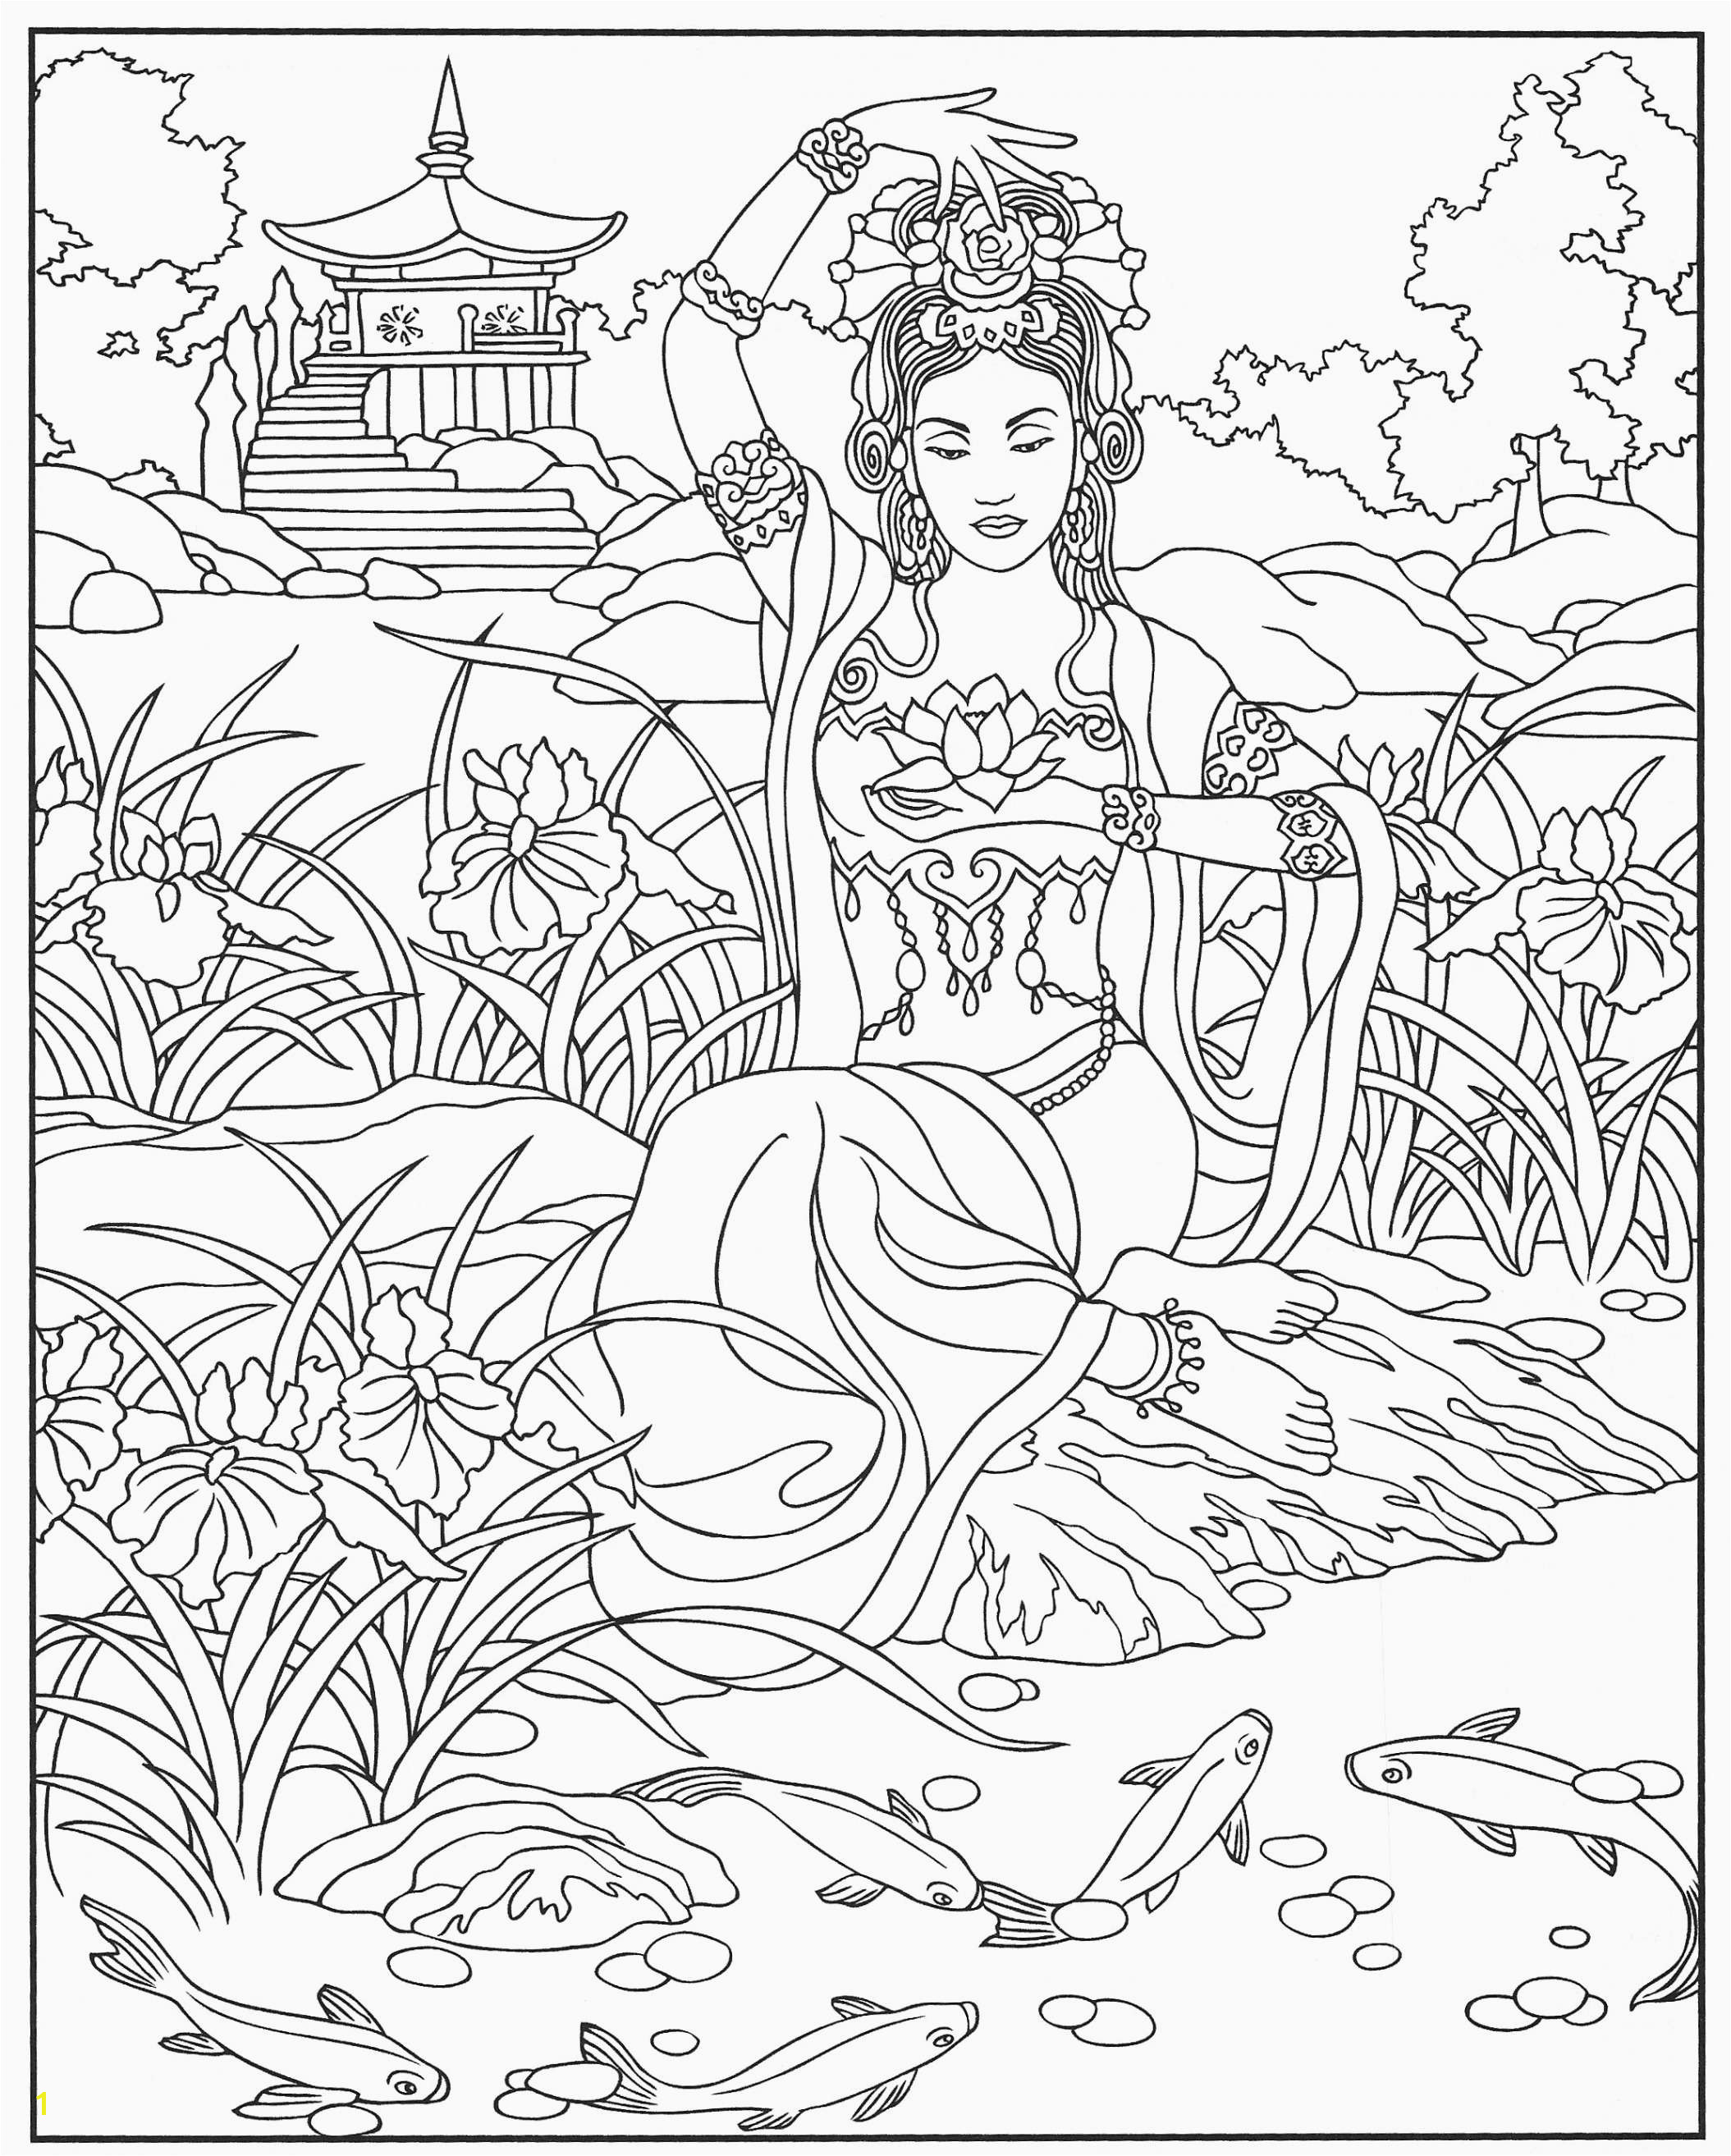 Elf Coloring Pages Crayola Christmas Coloring Pages Fresh Cool Coloring Page Unique Witch Coloring Pages